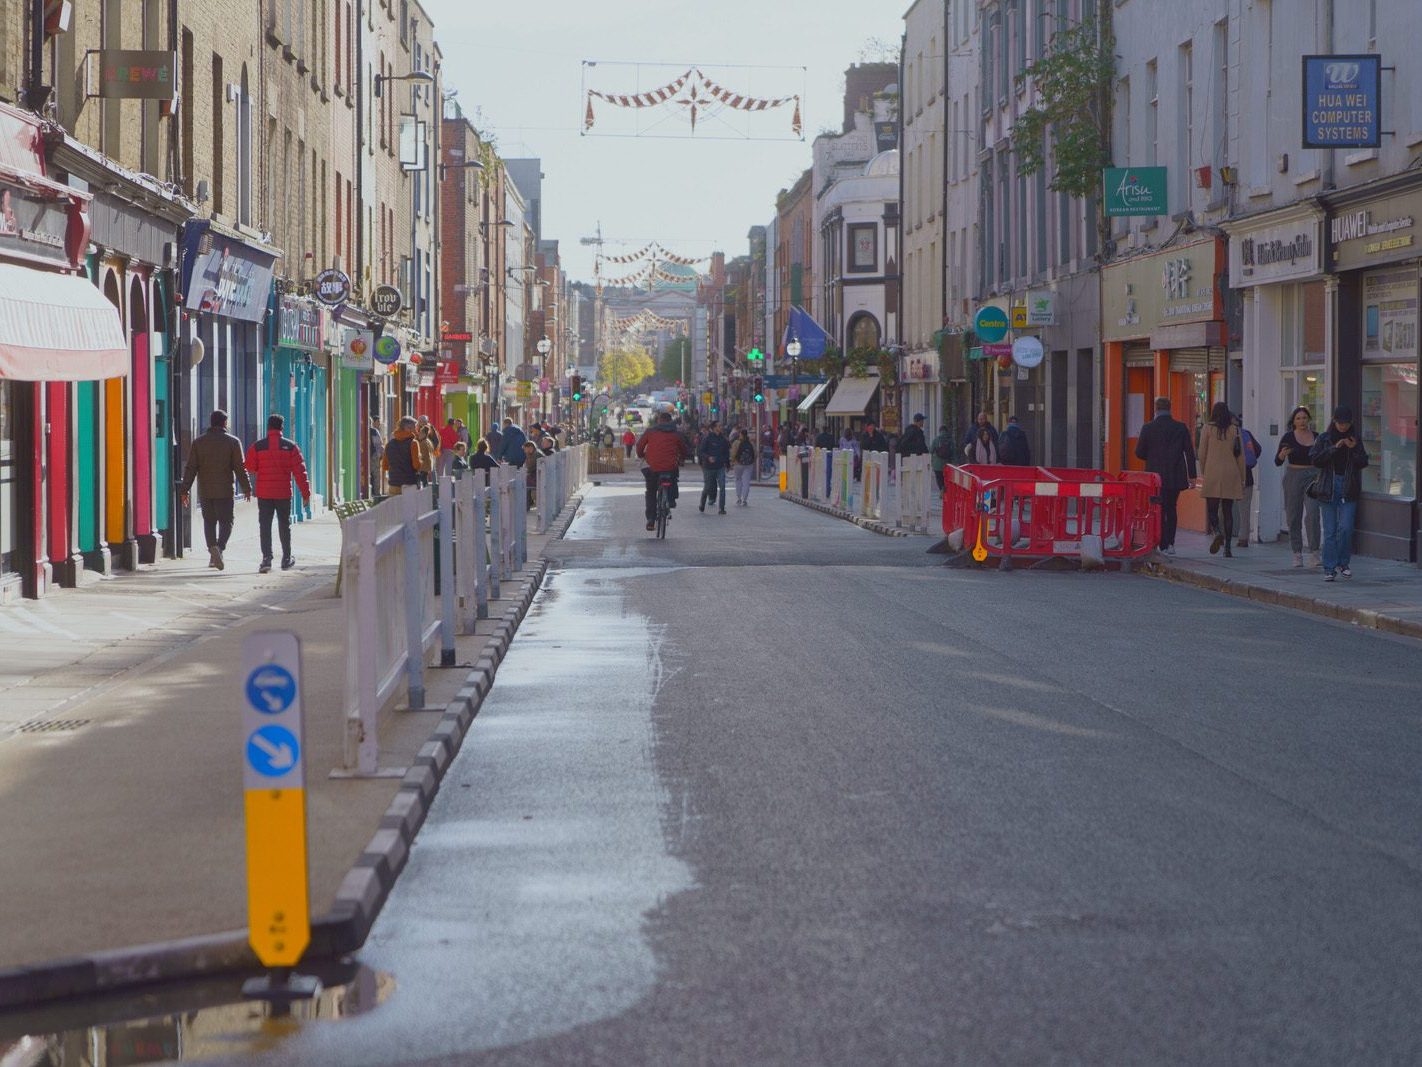 CAPEL STREET IS STILL A W.I.P. [THE PERIOD BETWEEN HALLOWEEN AND CHRISTMAS]-224794-1